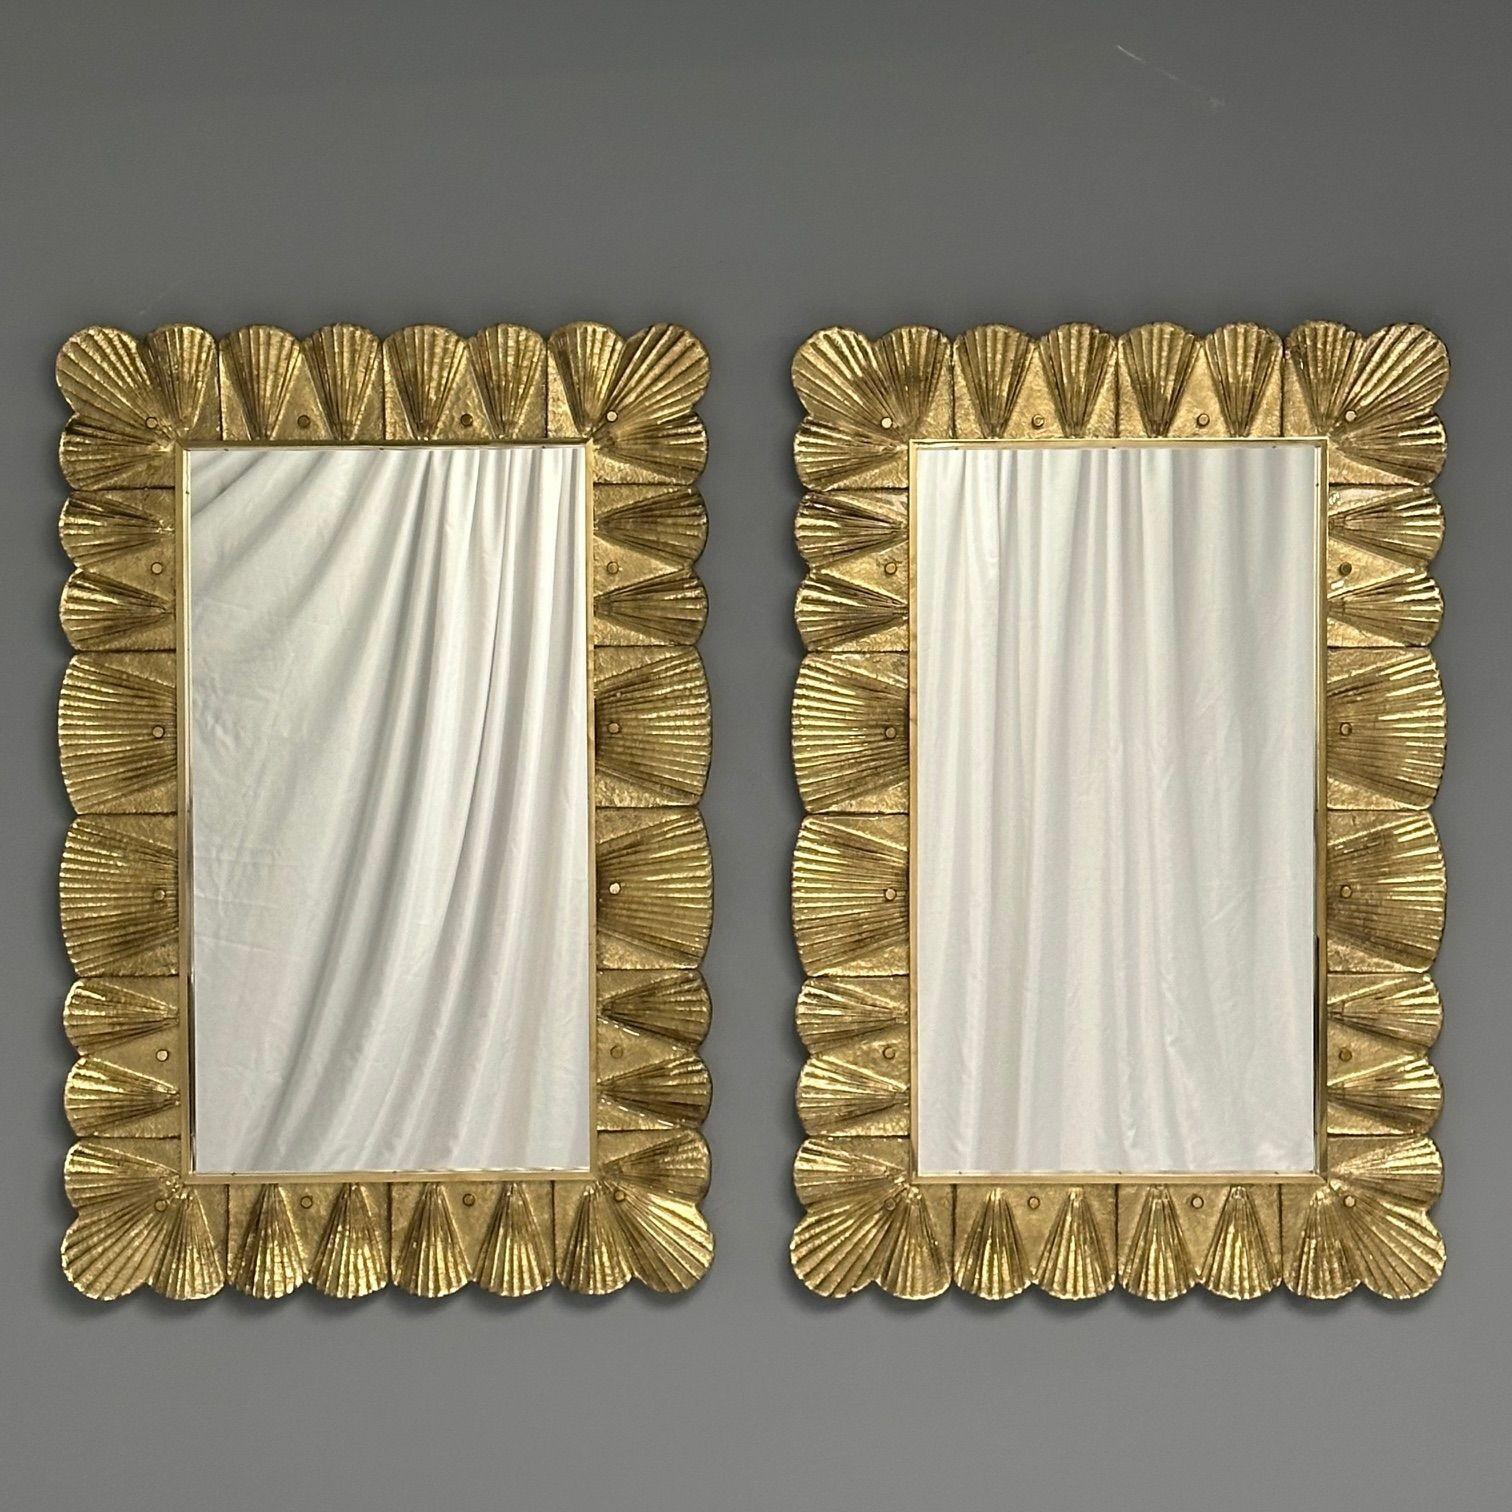 Contemporary, Wall Mirrors with Scallop Motif, Murano Glass, Gold Gilt, Brass, Italy, 2023

Pair of rectangular wall mirrors having a scallop motif designed and produced in Italy. Each mirror has holes on the back to be hung either vertically or